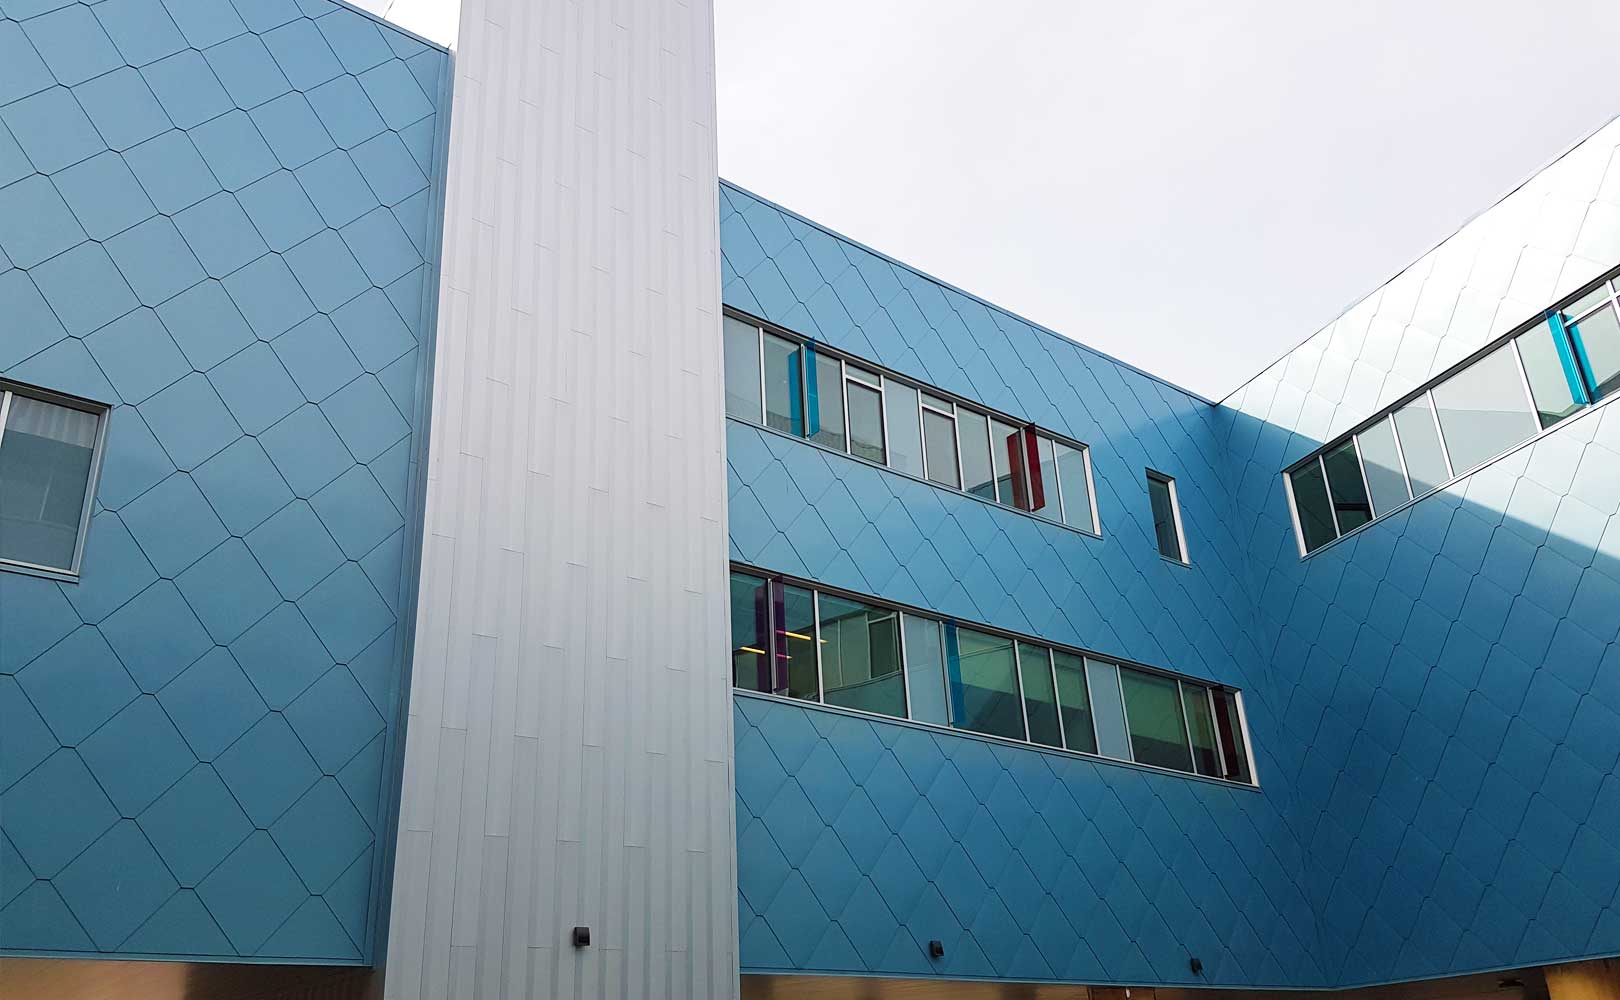 Jim Pattison Children's Hospital in Saskatoon - Commercial roofing and building envelope by Flynn Group of Companies